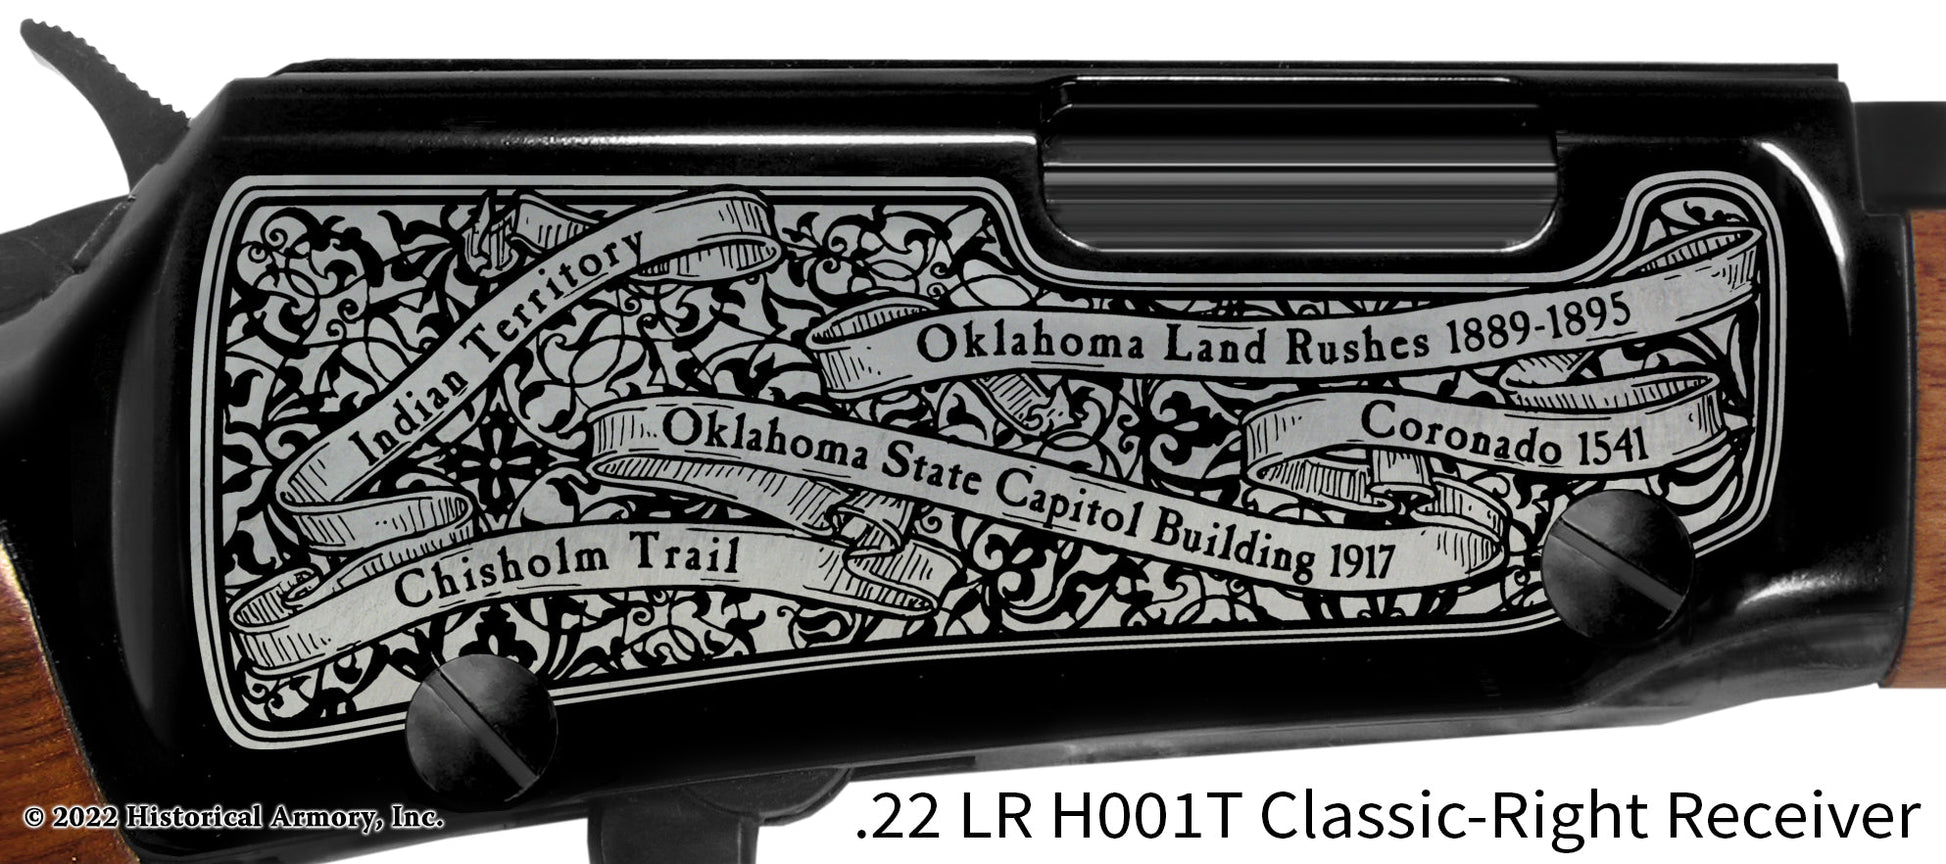 Oklahoma State Pride Engraved H00T Receiver detail Henry Rifle